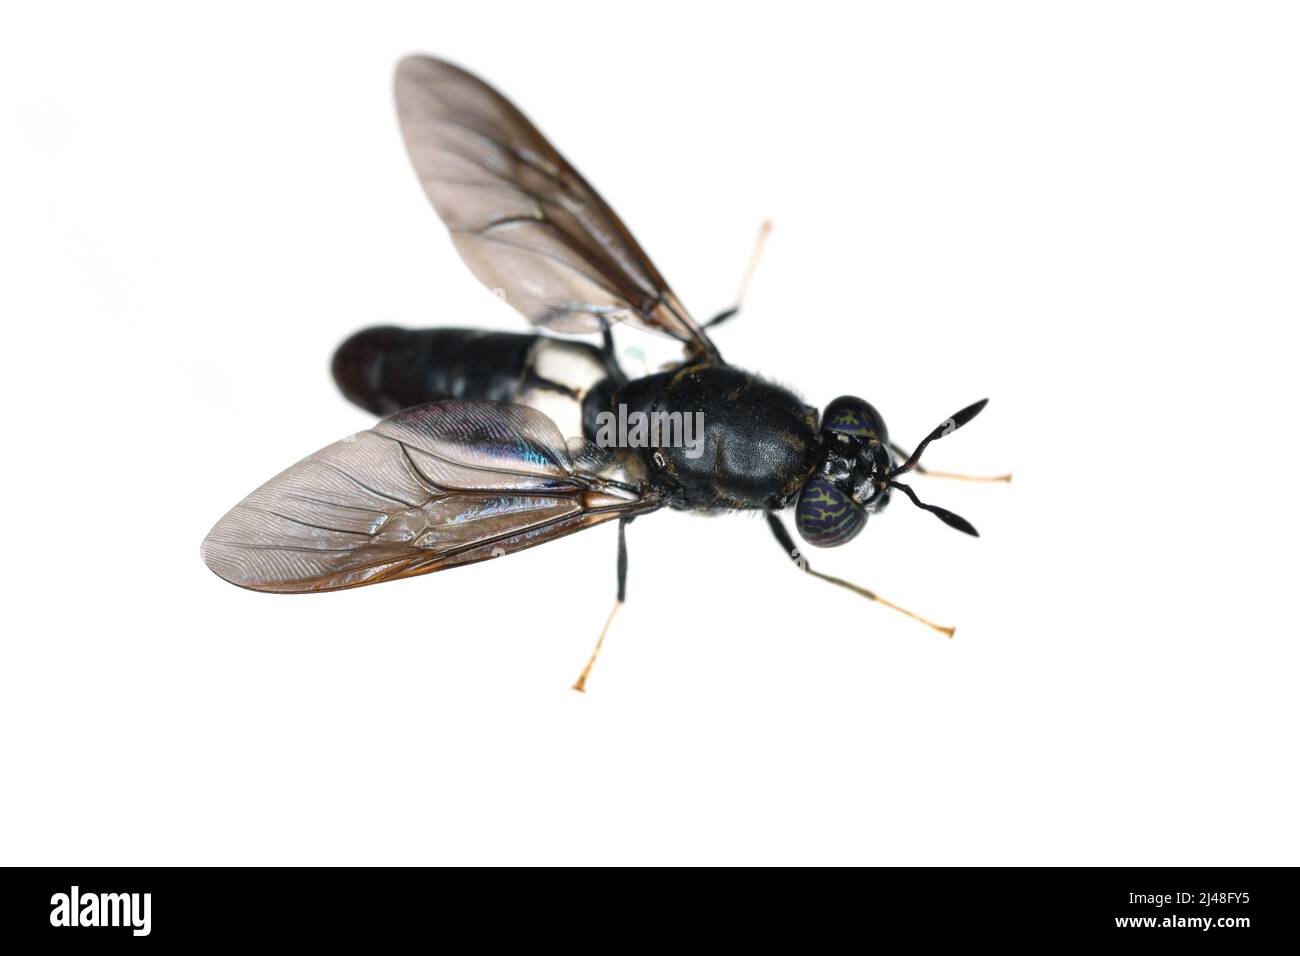 Black soldier fly species Hermetia illucens in high definition with extreme focus. Isolated on white background. Stock Photo